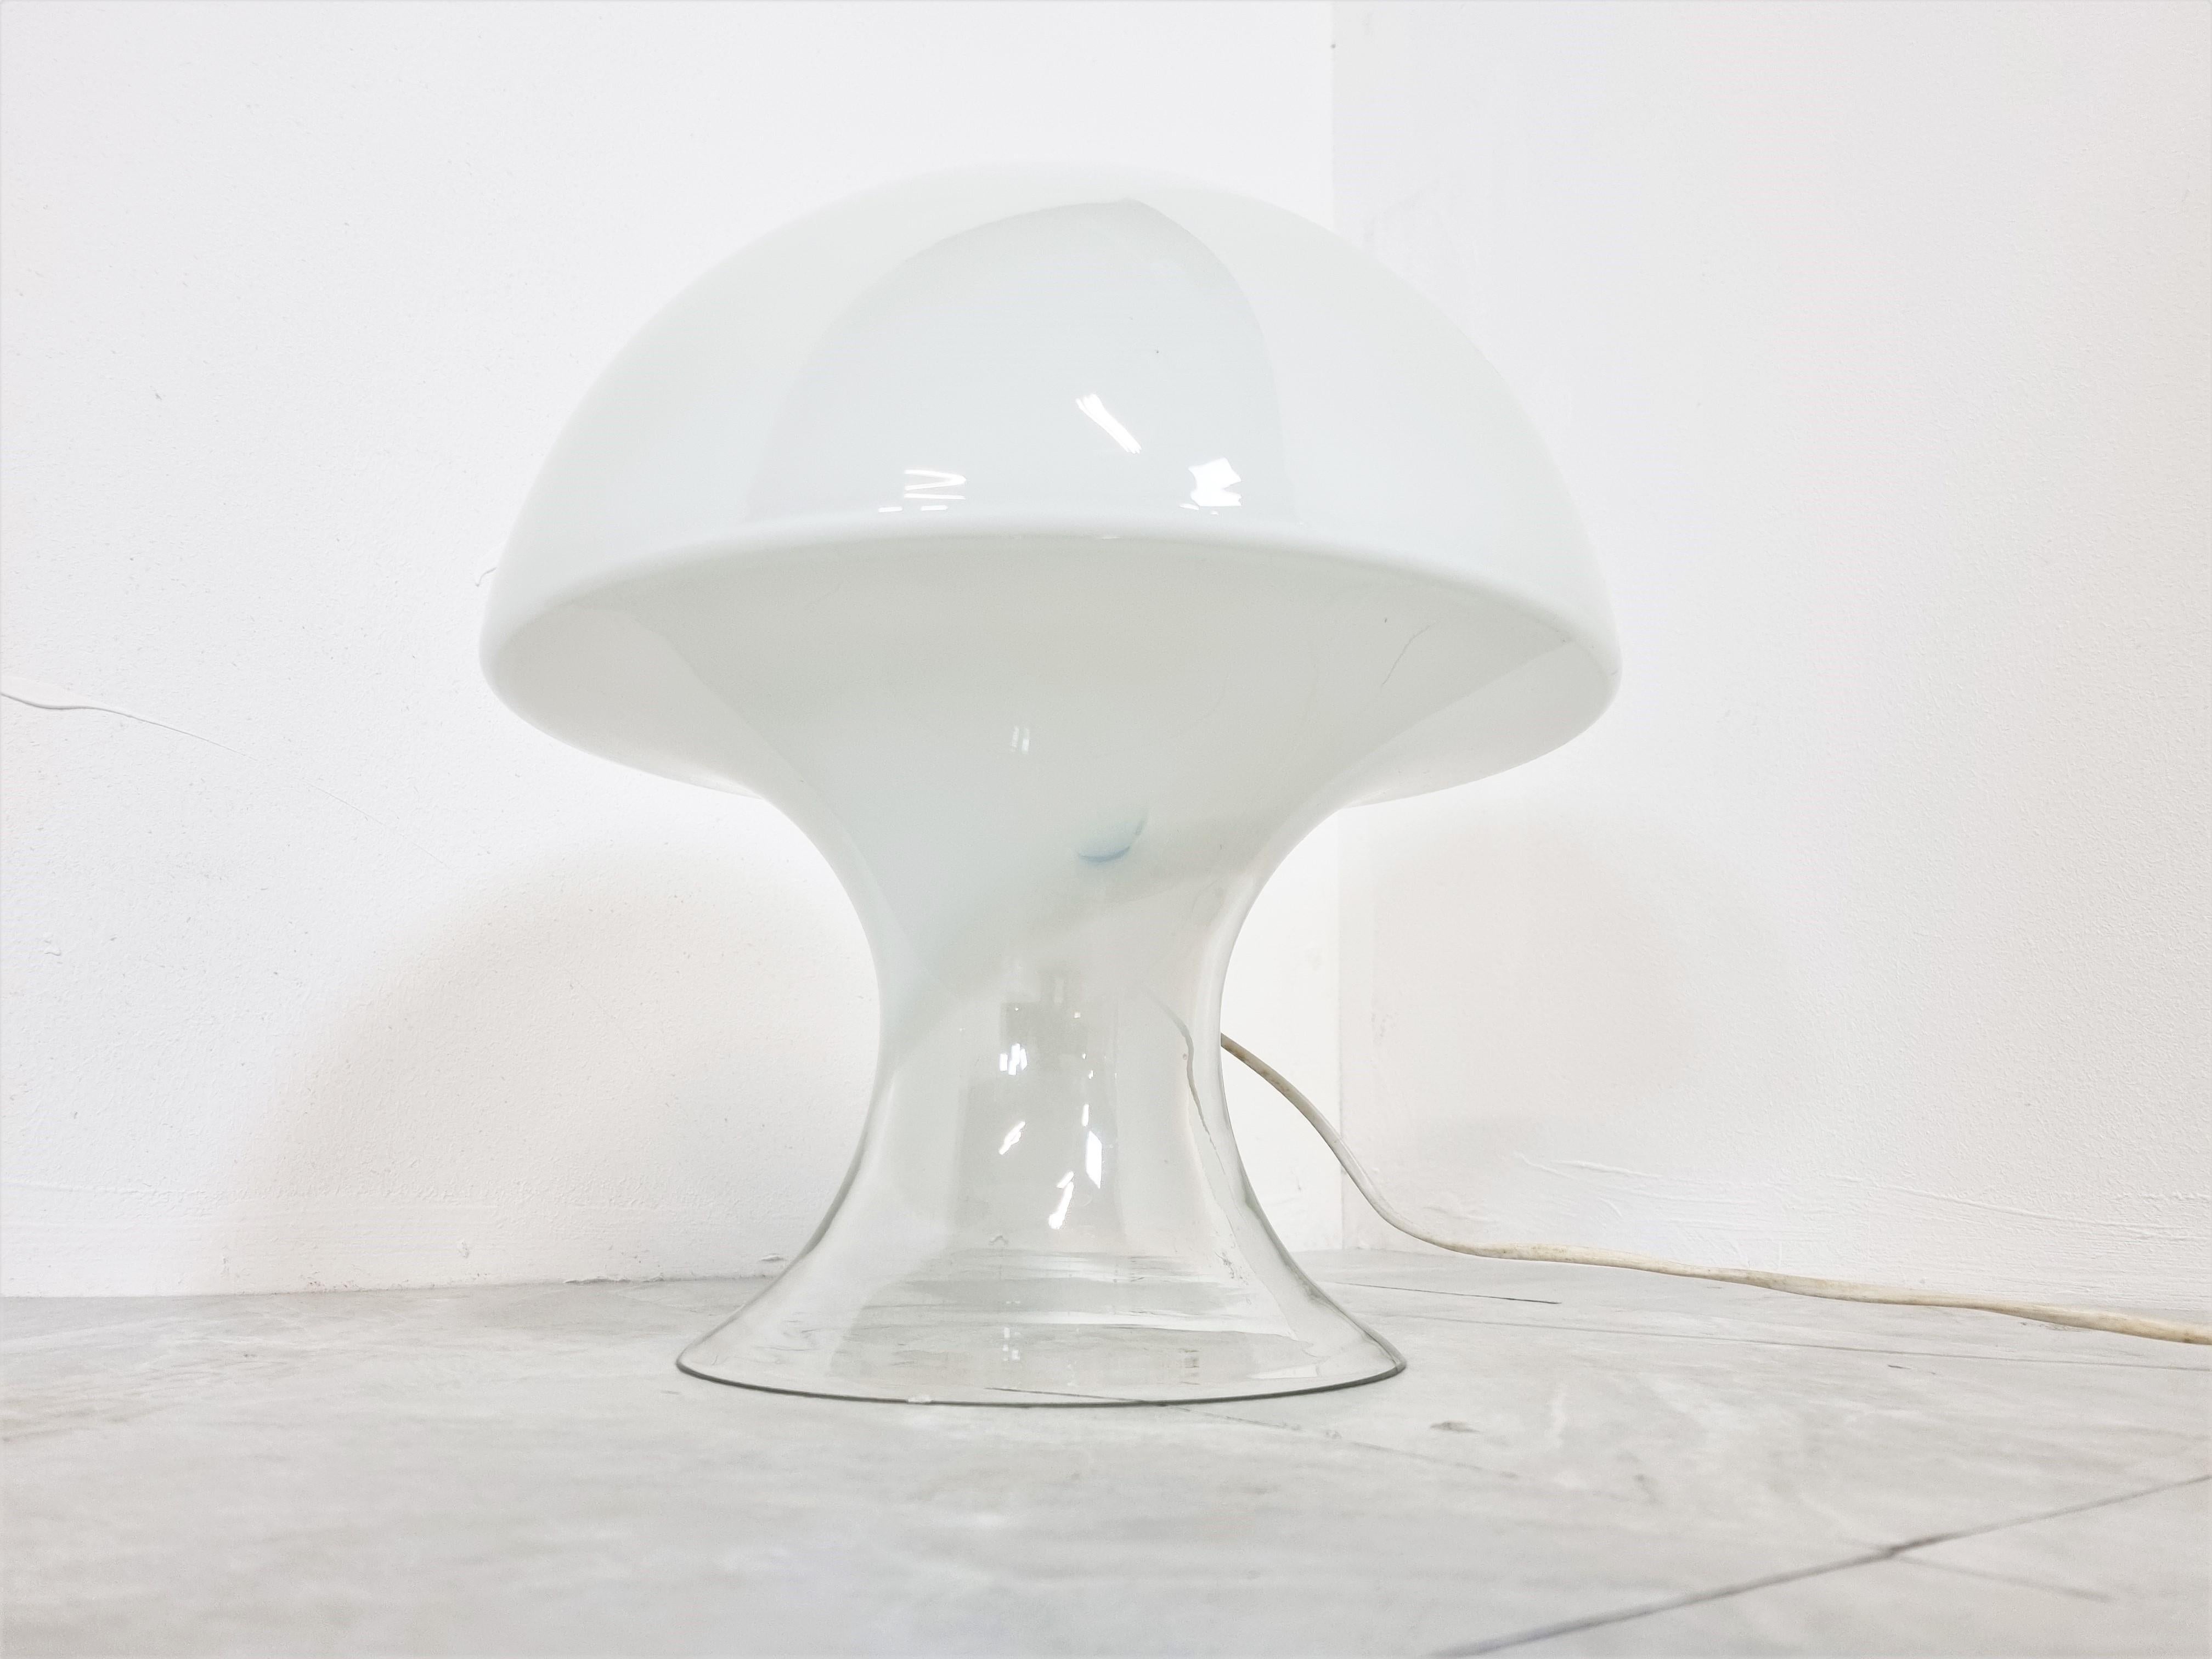 Mid century white opal hand blown murano glass table lamp.

This 'mushroom' table lamp emits a beautiful light and has a clear glass base and then a more white opal effect towards the top.

Designed by Enrico Capuzzo

1960s - Italy

Good